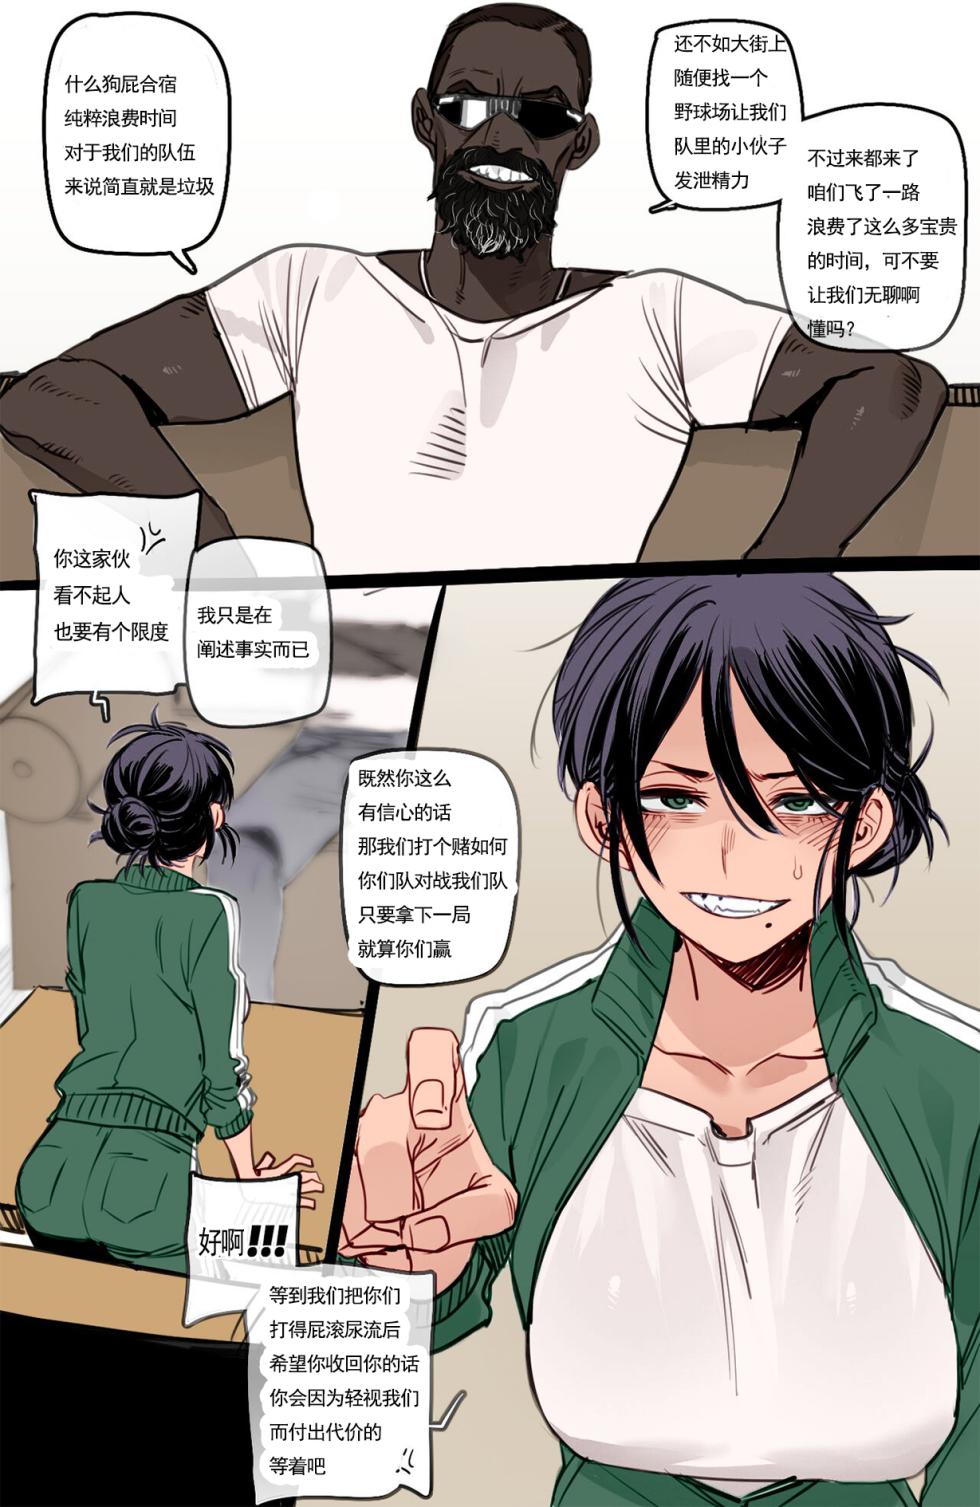 [ratatatat74] Blacked Coach 媚黑教练[Chinese][Colorized][挽歌个人汉化] - Page 2